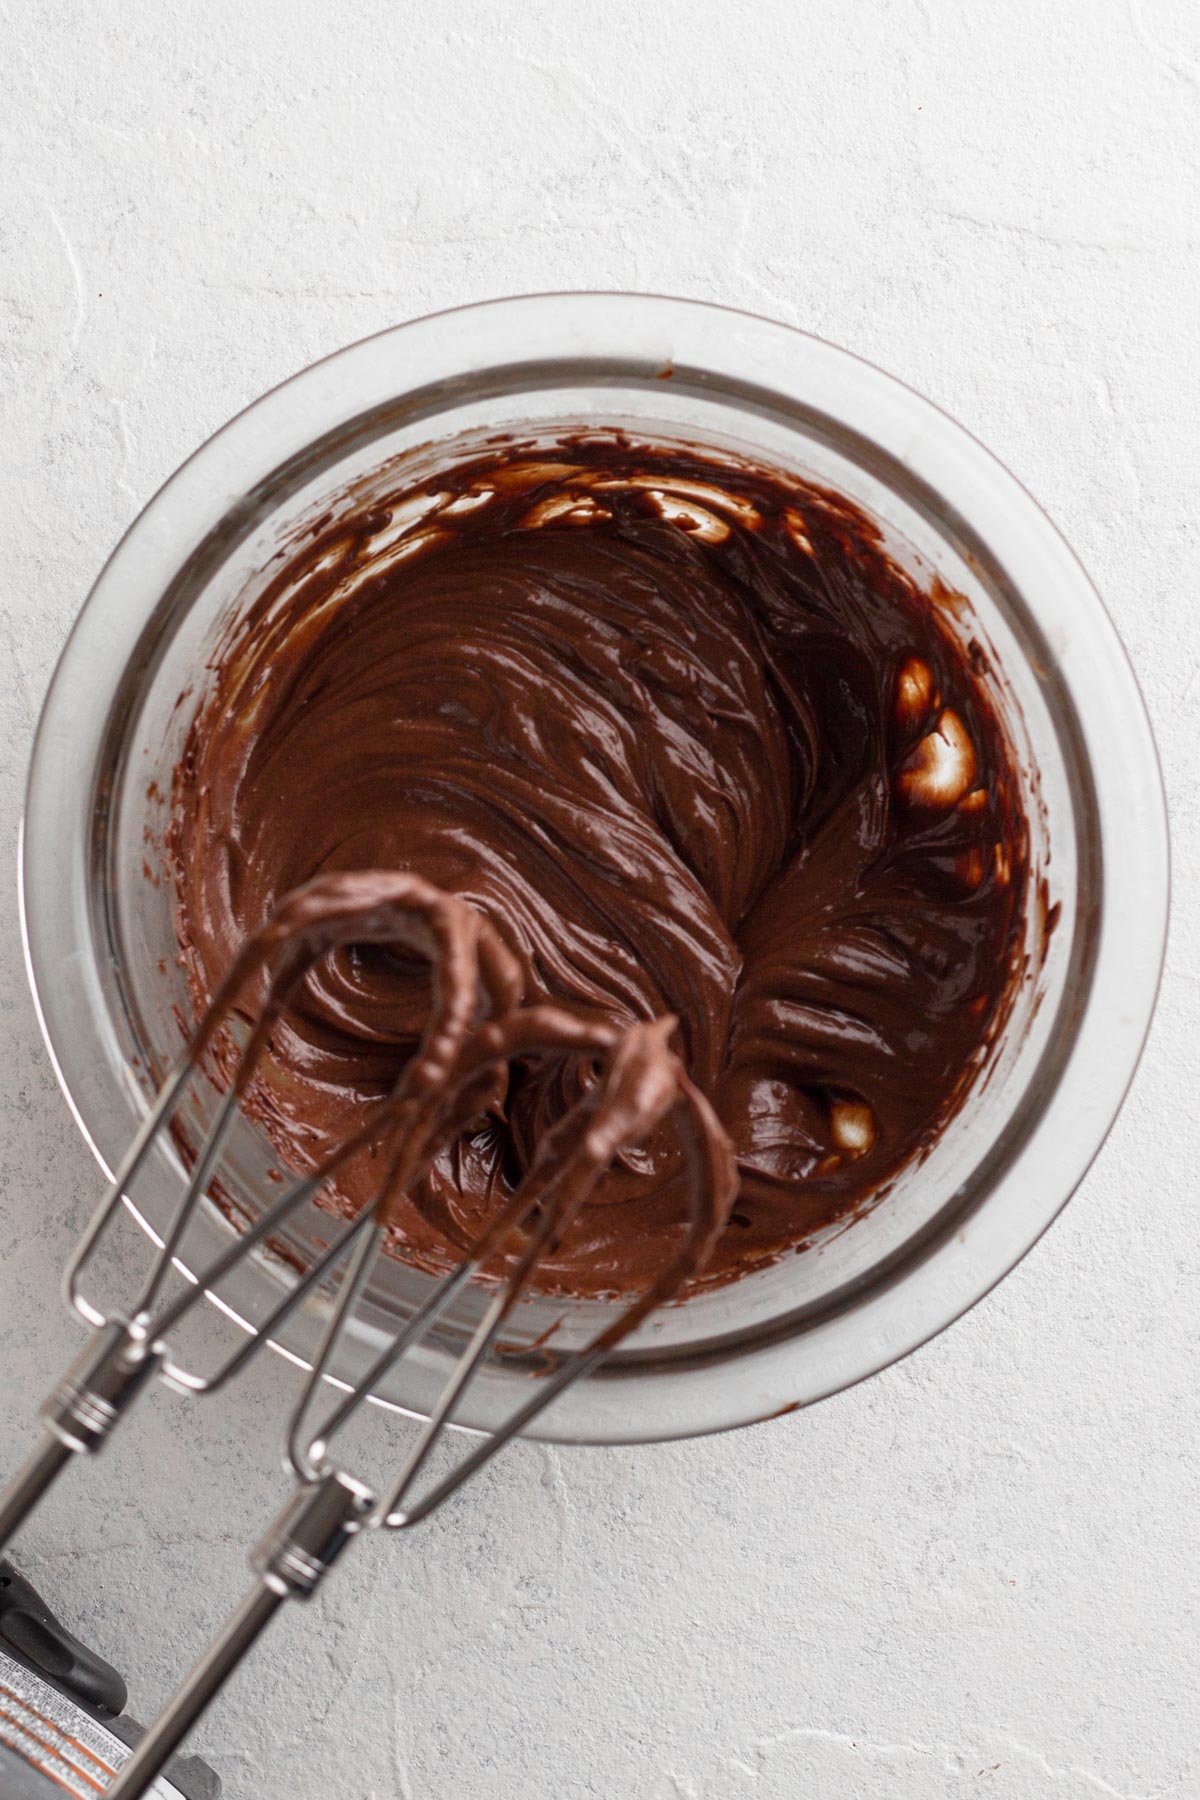 Whipped chocolate ganache in a glass mixing bowl with an electric hand mixer.